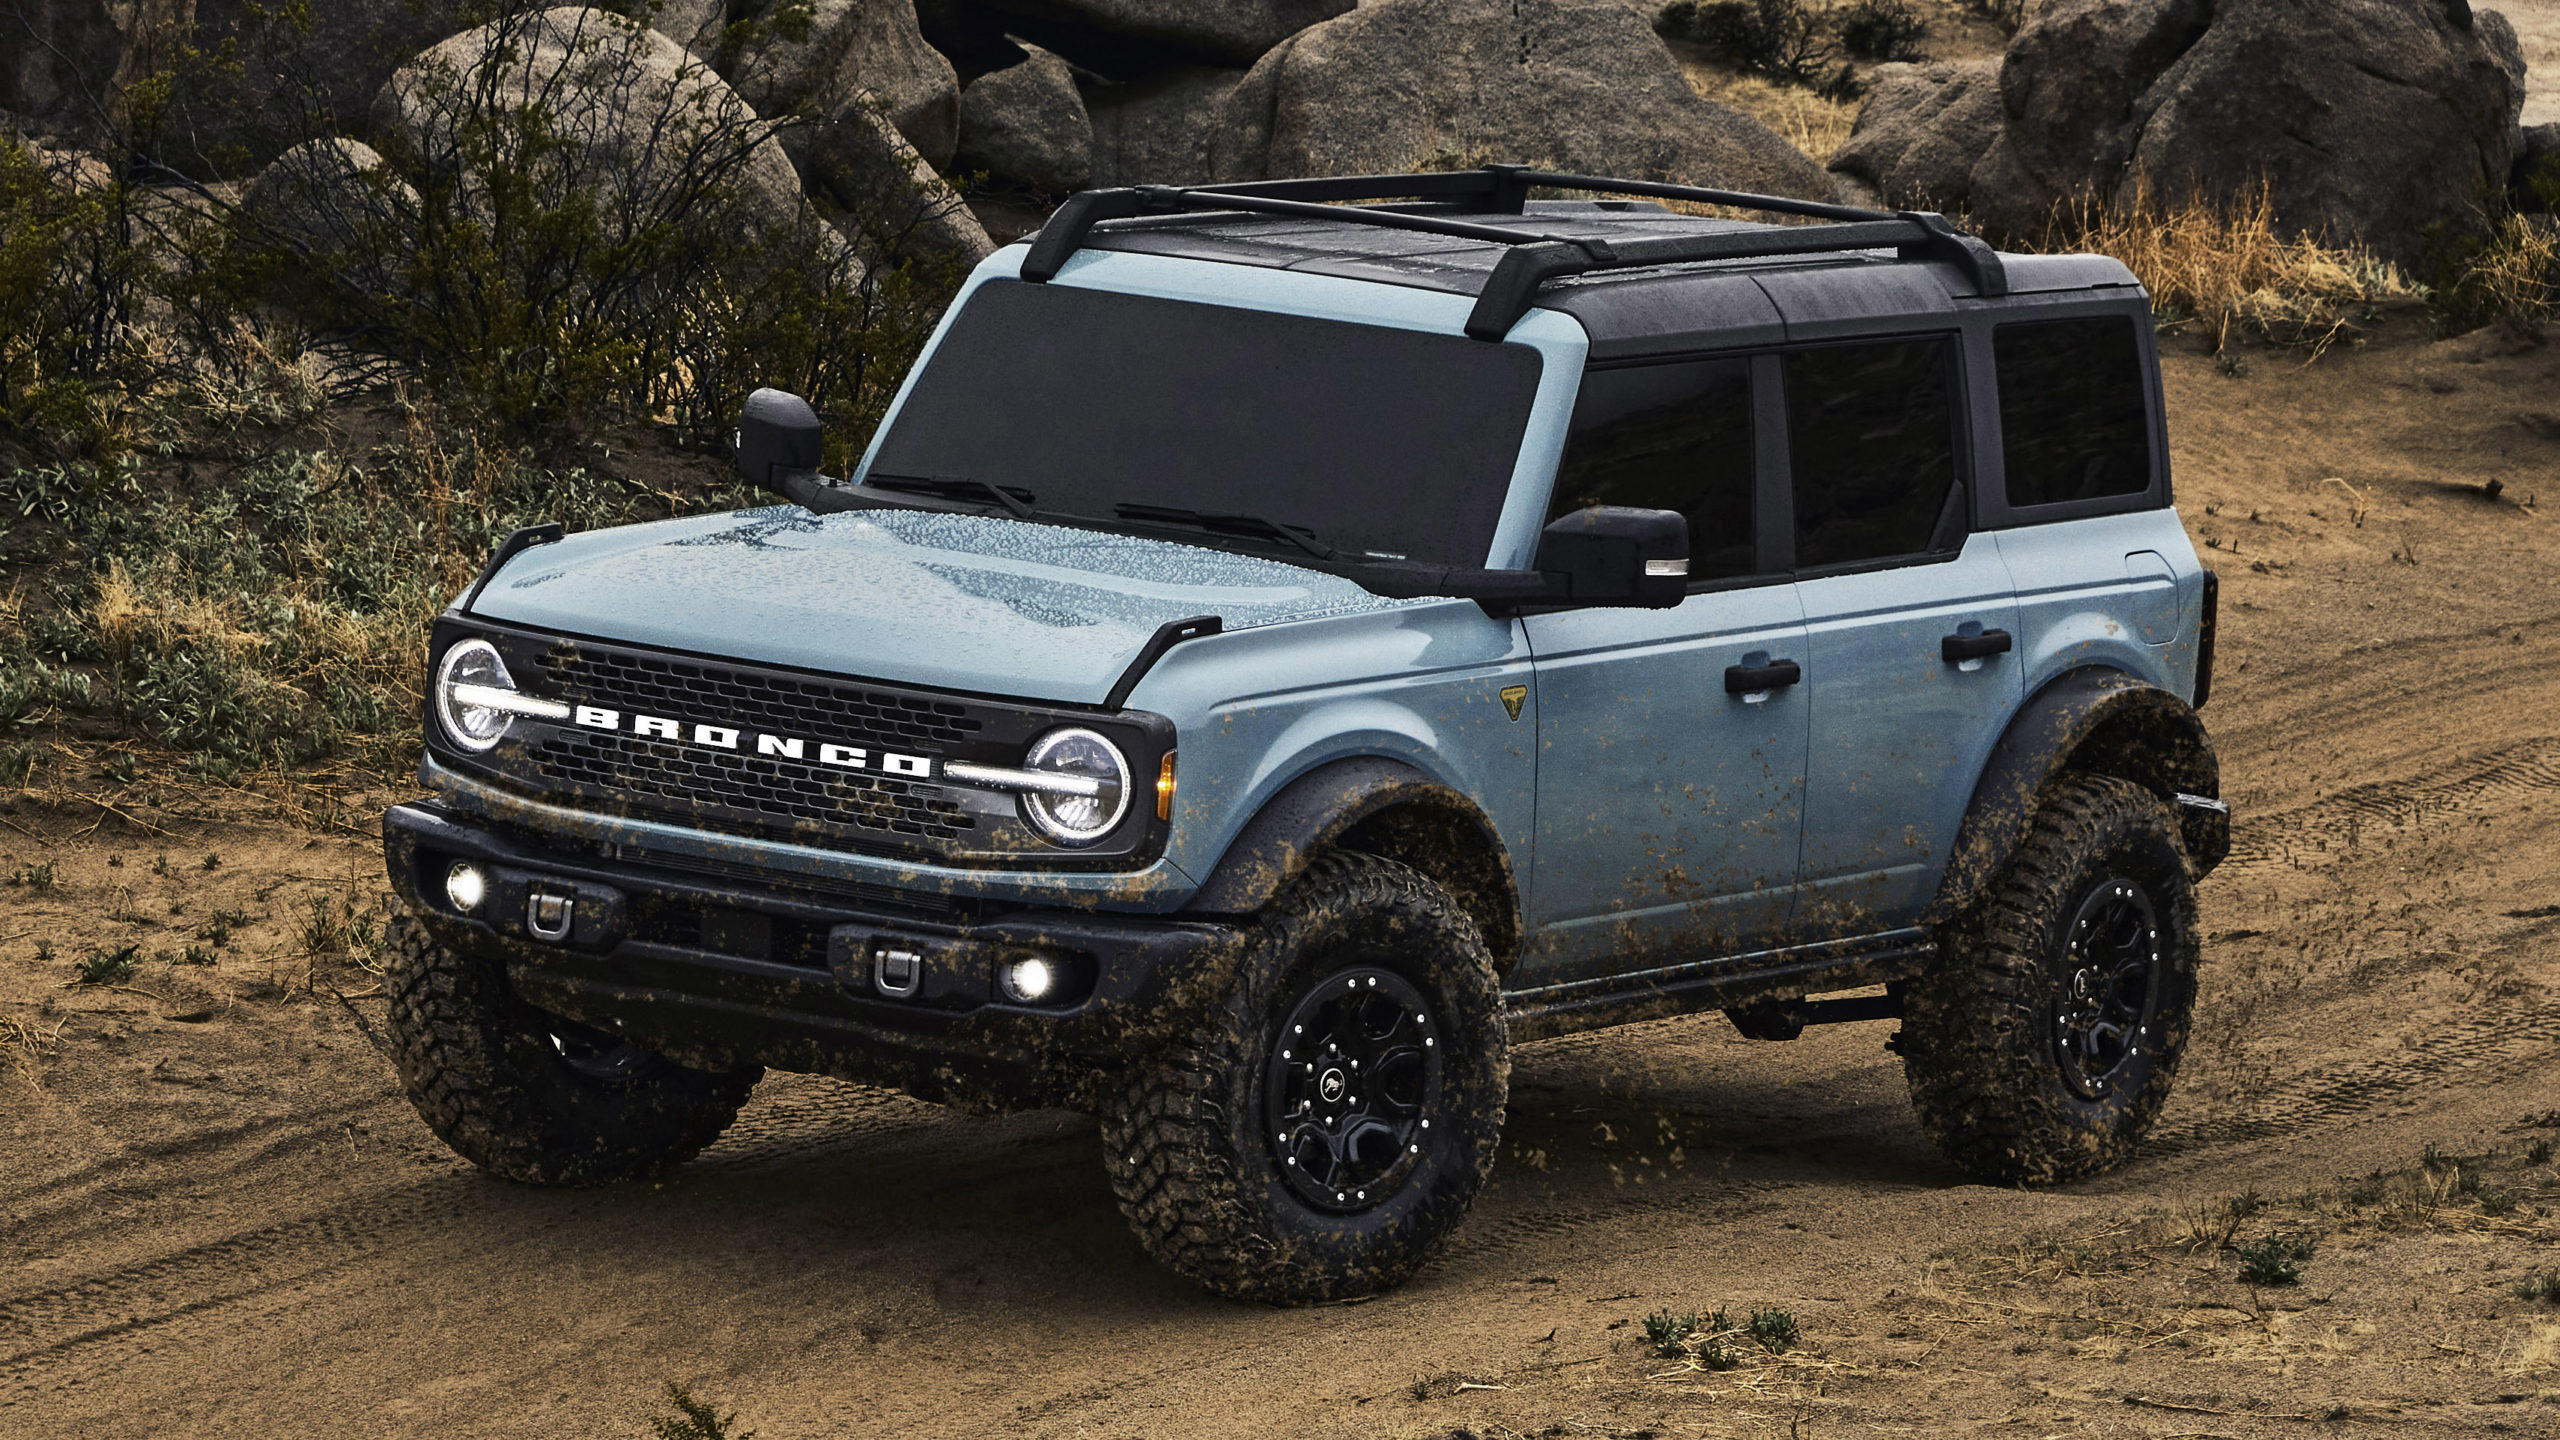 The Ford Bronco is the Ultimate 4x4 Outdoor Life